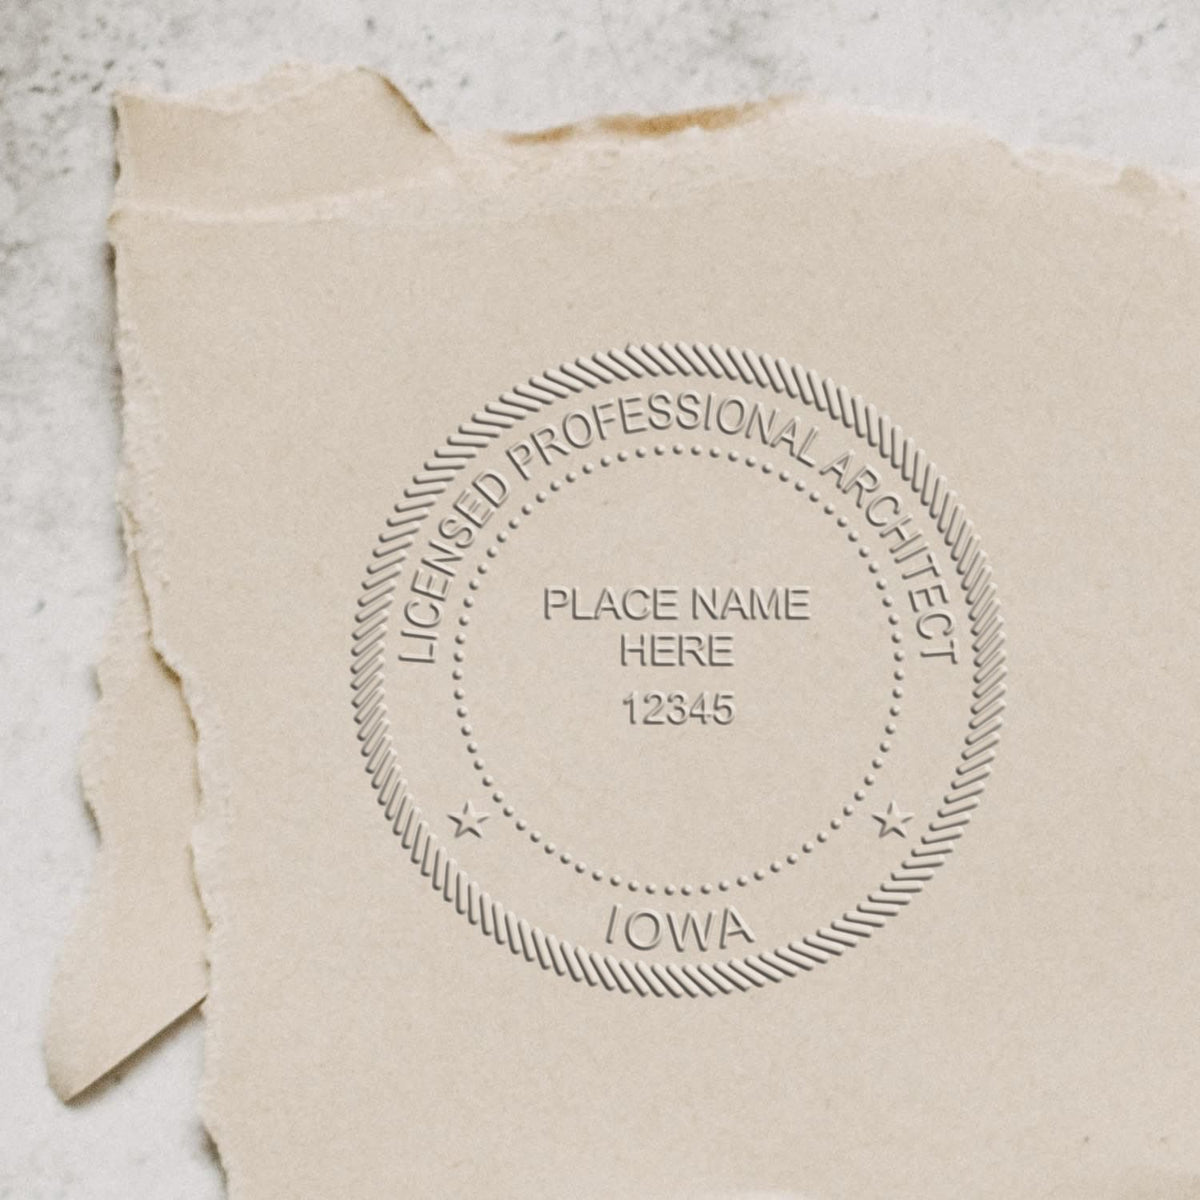 Extended Long Reach Iowa Architect Seal Embosser in use photo showing a stamped imprint of the Extended Long Reach Iowa Architect Seal Embosser